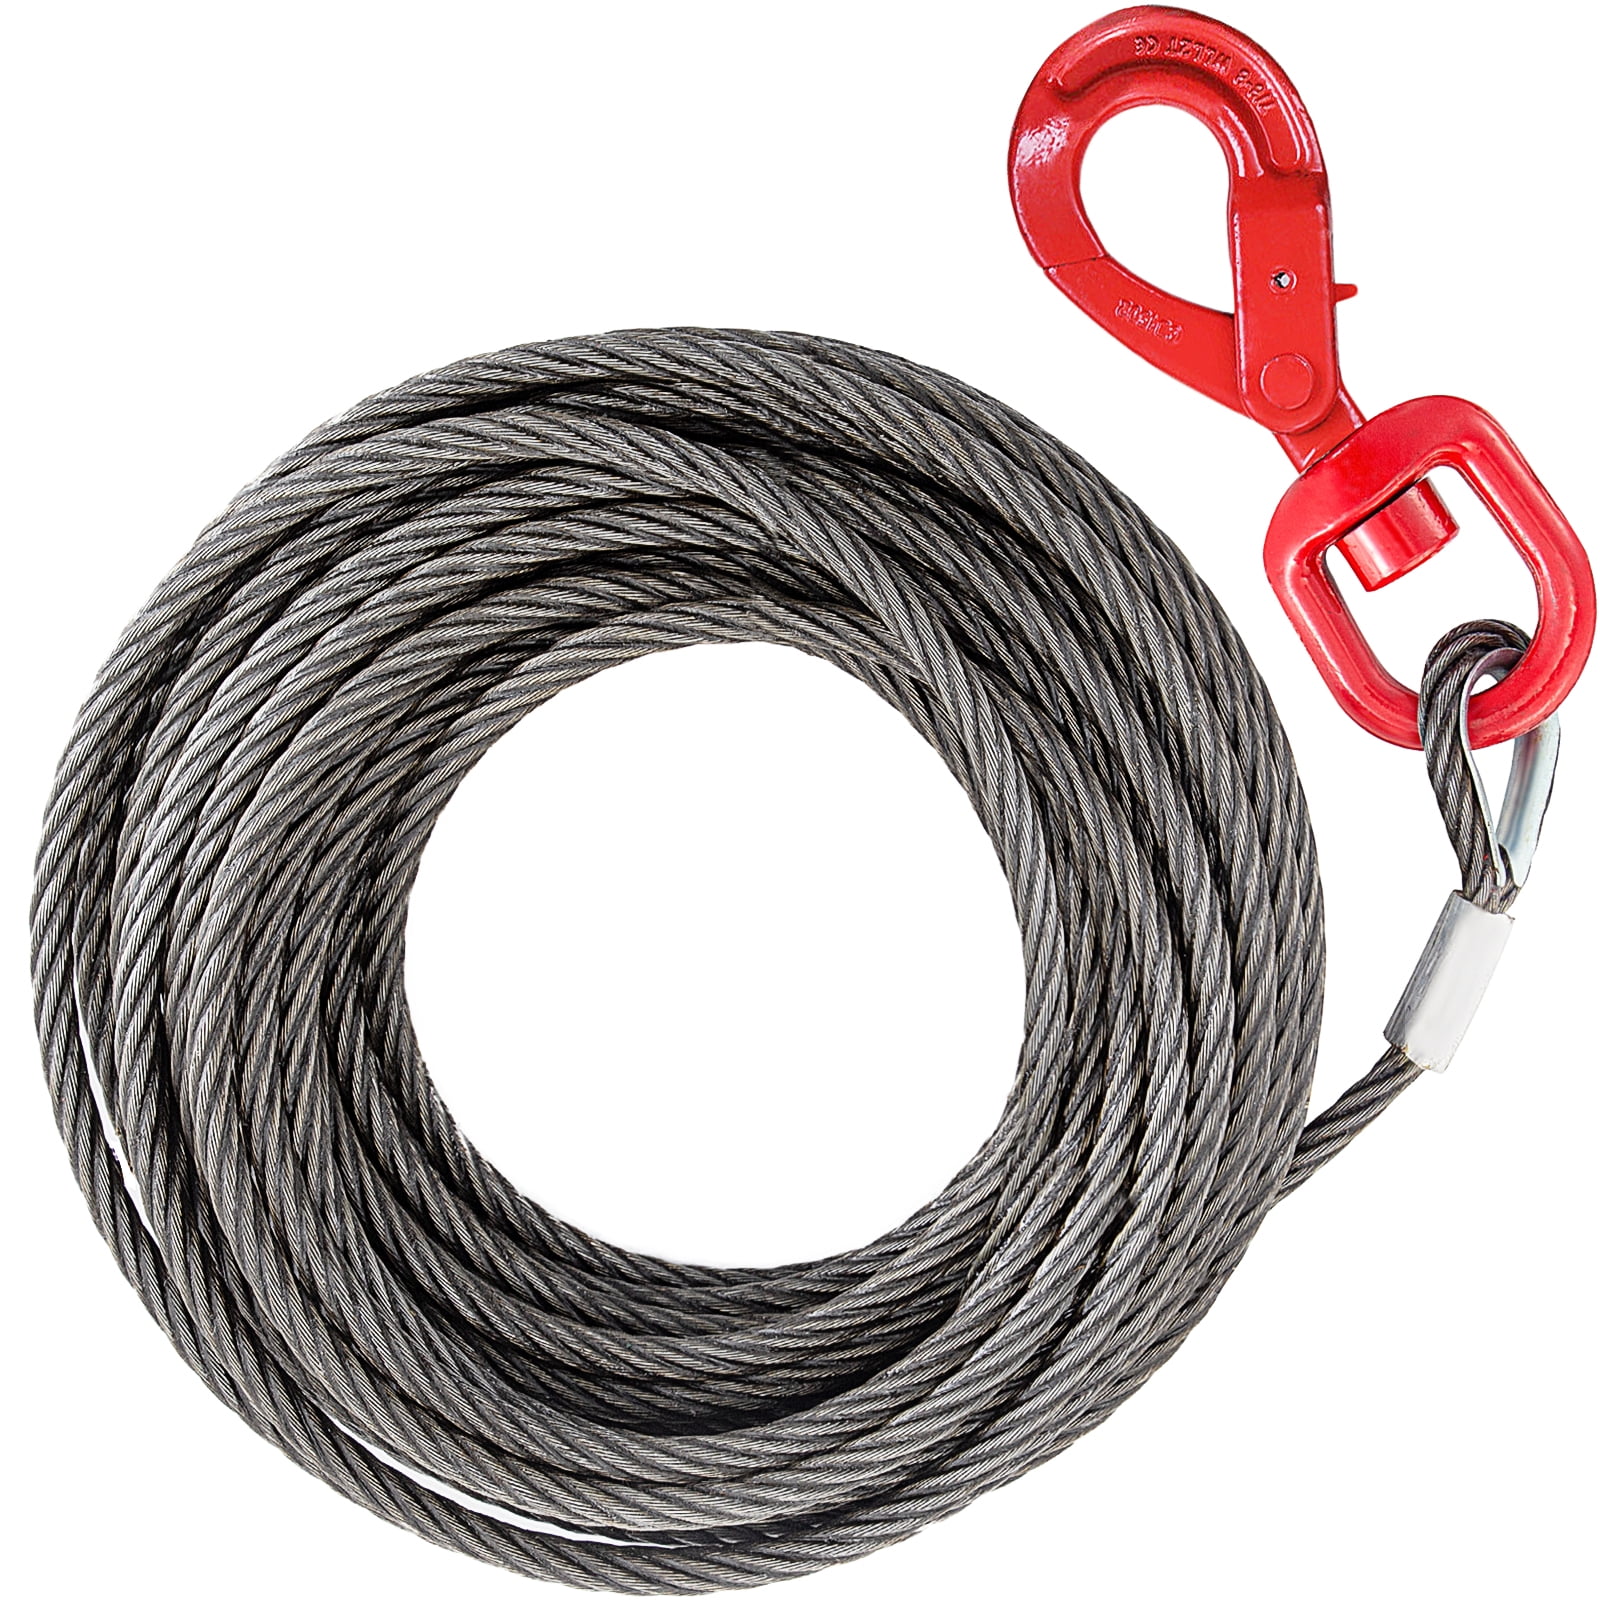 VEVOR Galvanized Steel Winch Cable, 3/8 x 100' - Wire Rope with